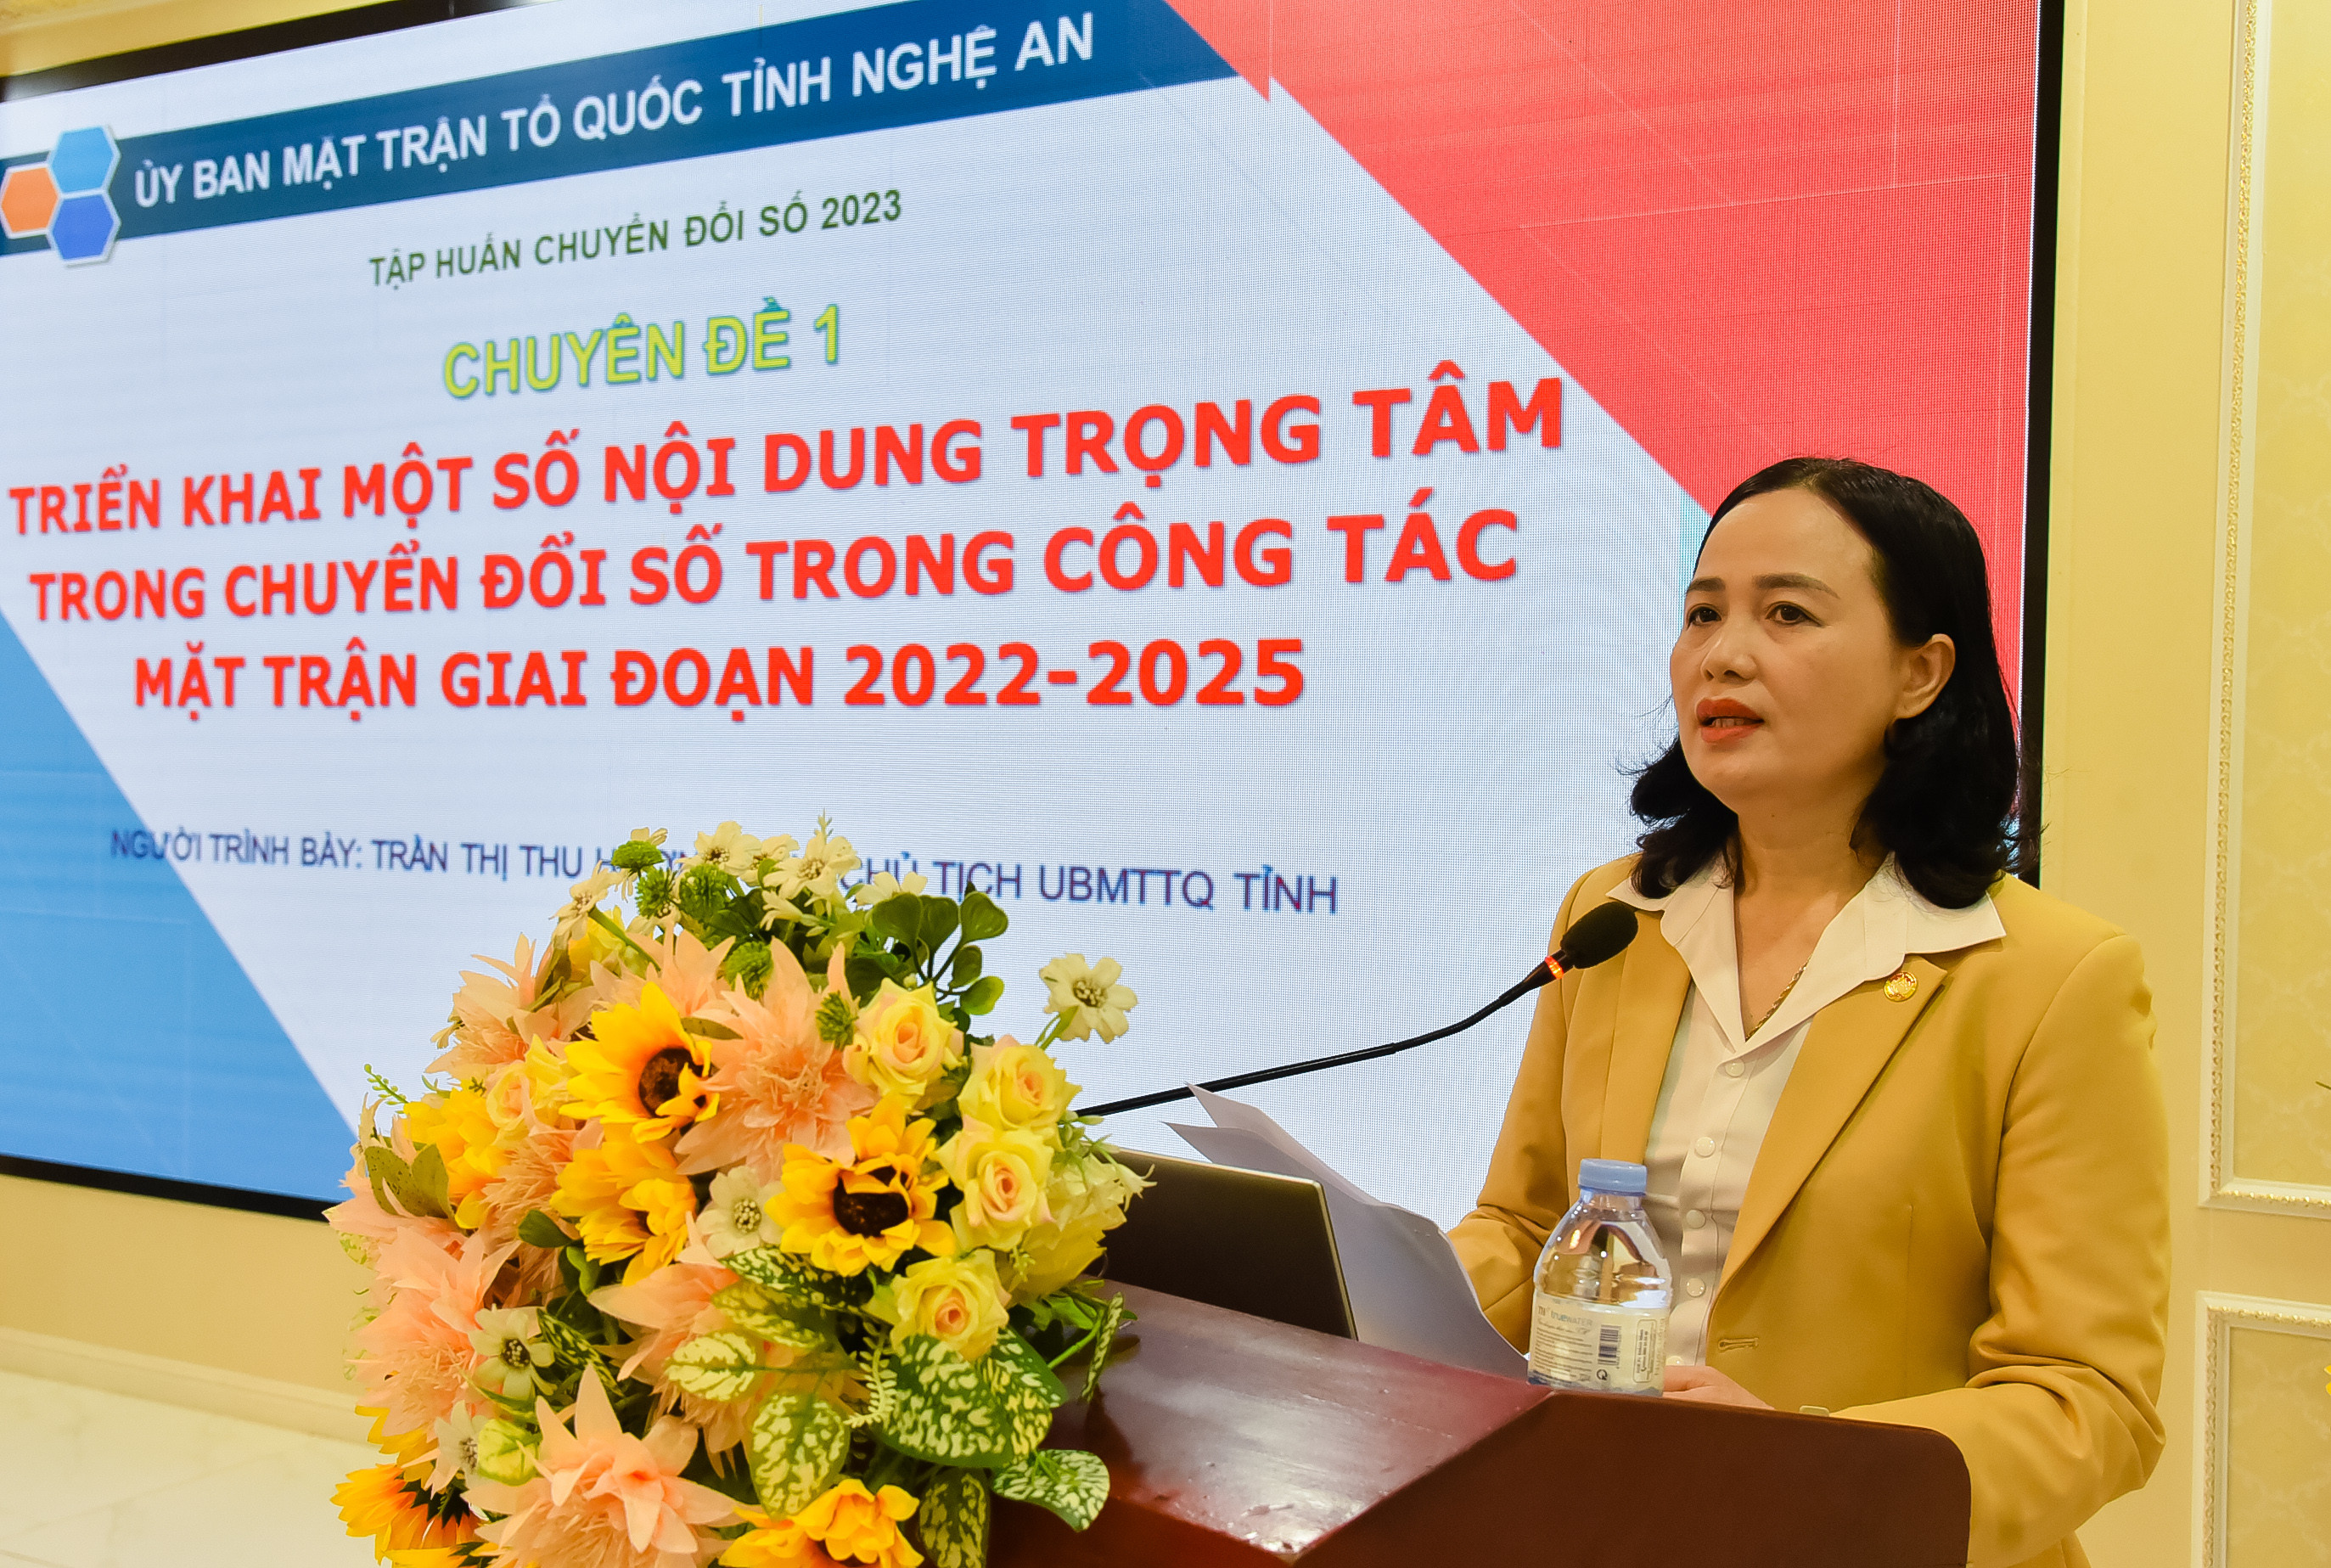 bna-ch-anh-thanh-le-1646.jpg